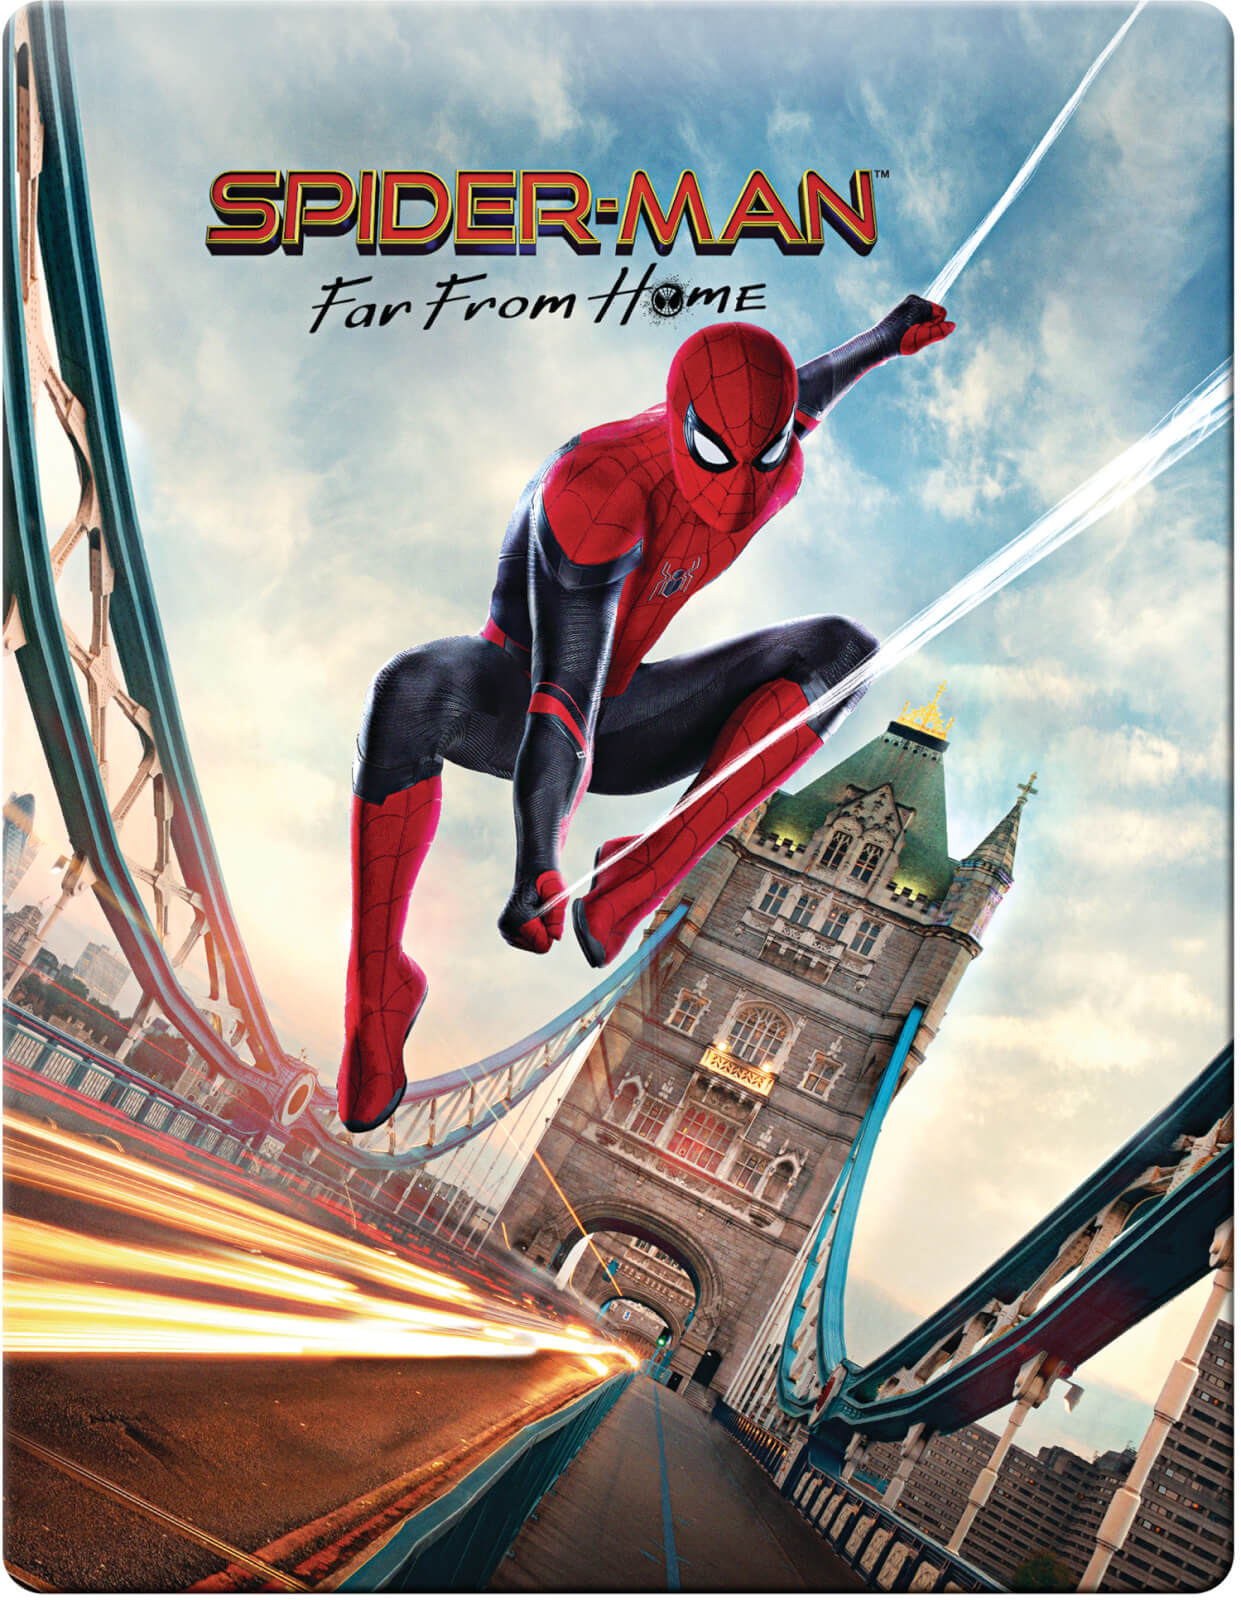 Spider-Man: Far From Home - 4K Ultra HD (Includes 2D Blu-Ray) - Zavvi Exclusive Steelbook